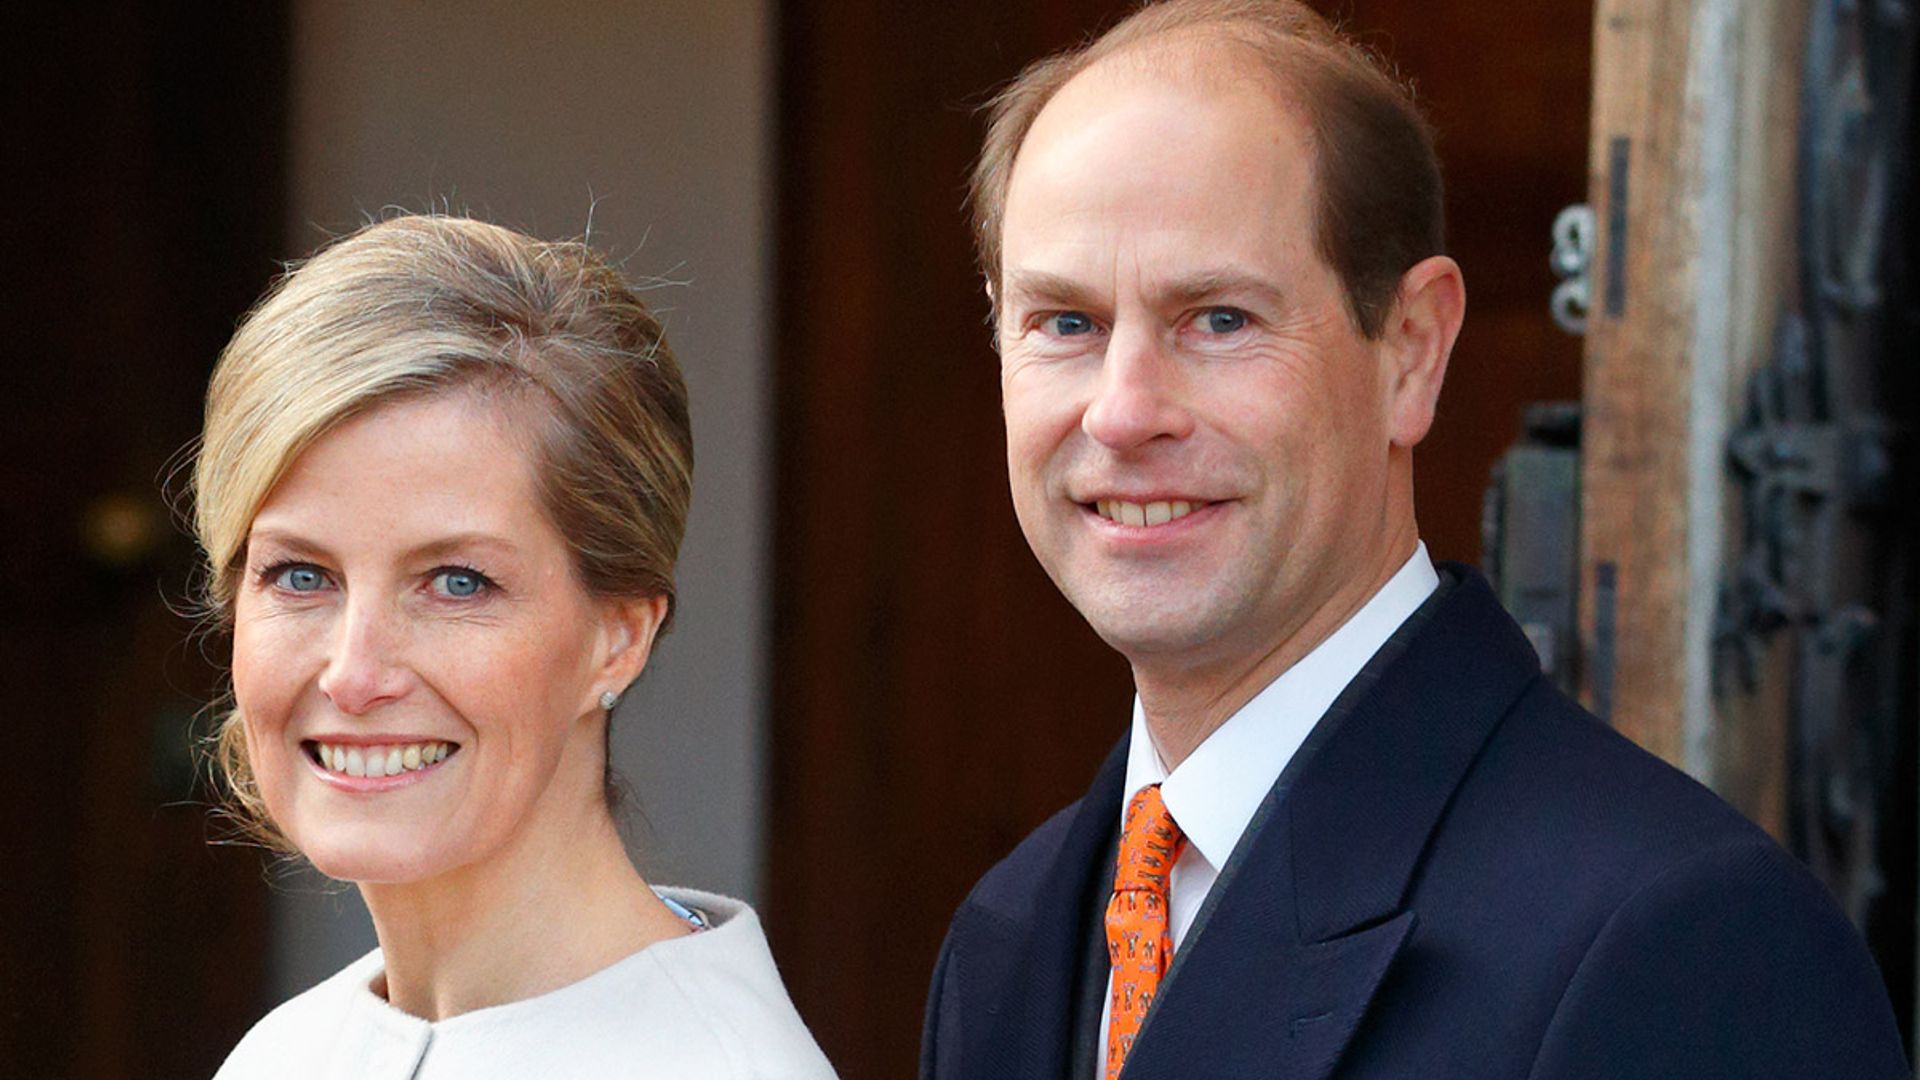 Here's how Prince Edward celebrated his birthday